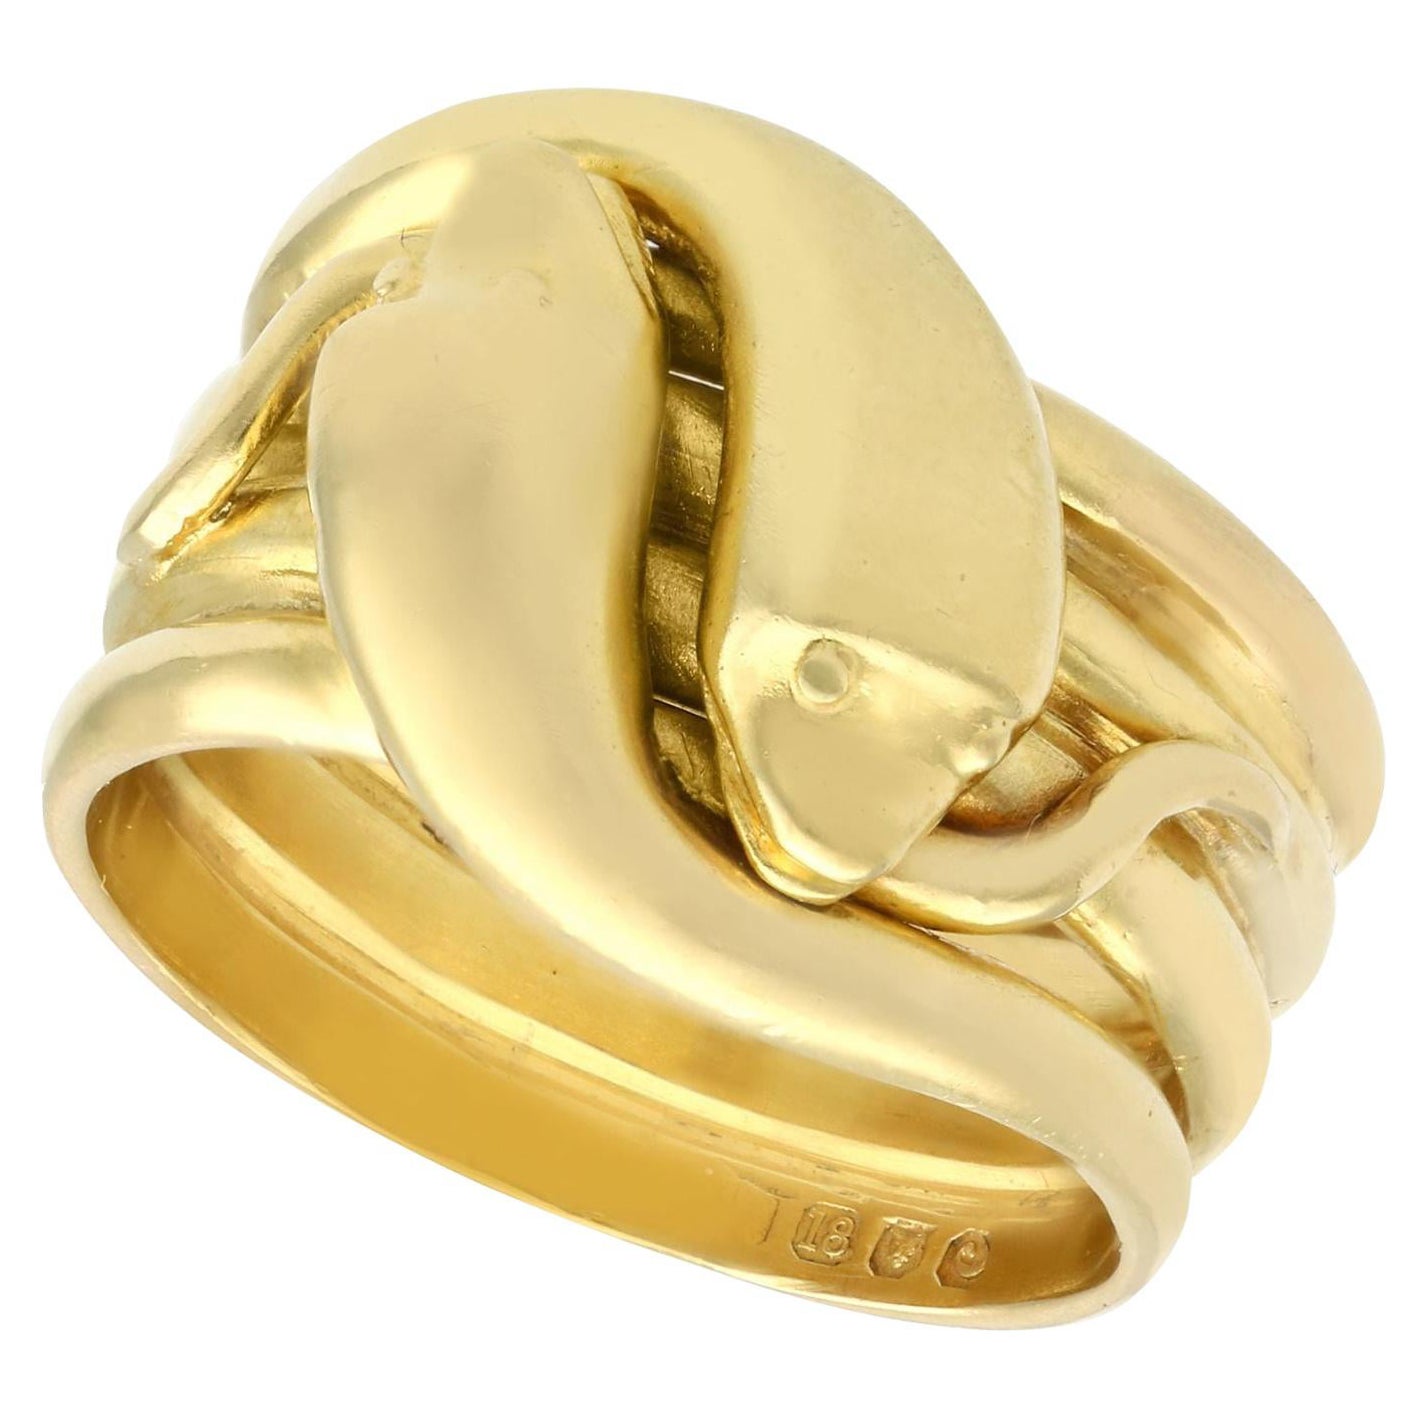 Fancy Dress Ladies Decorative Vintage Victorian Gold Plated Ring 